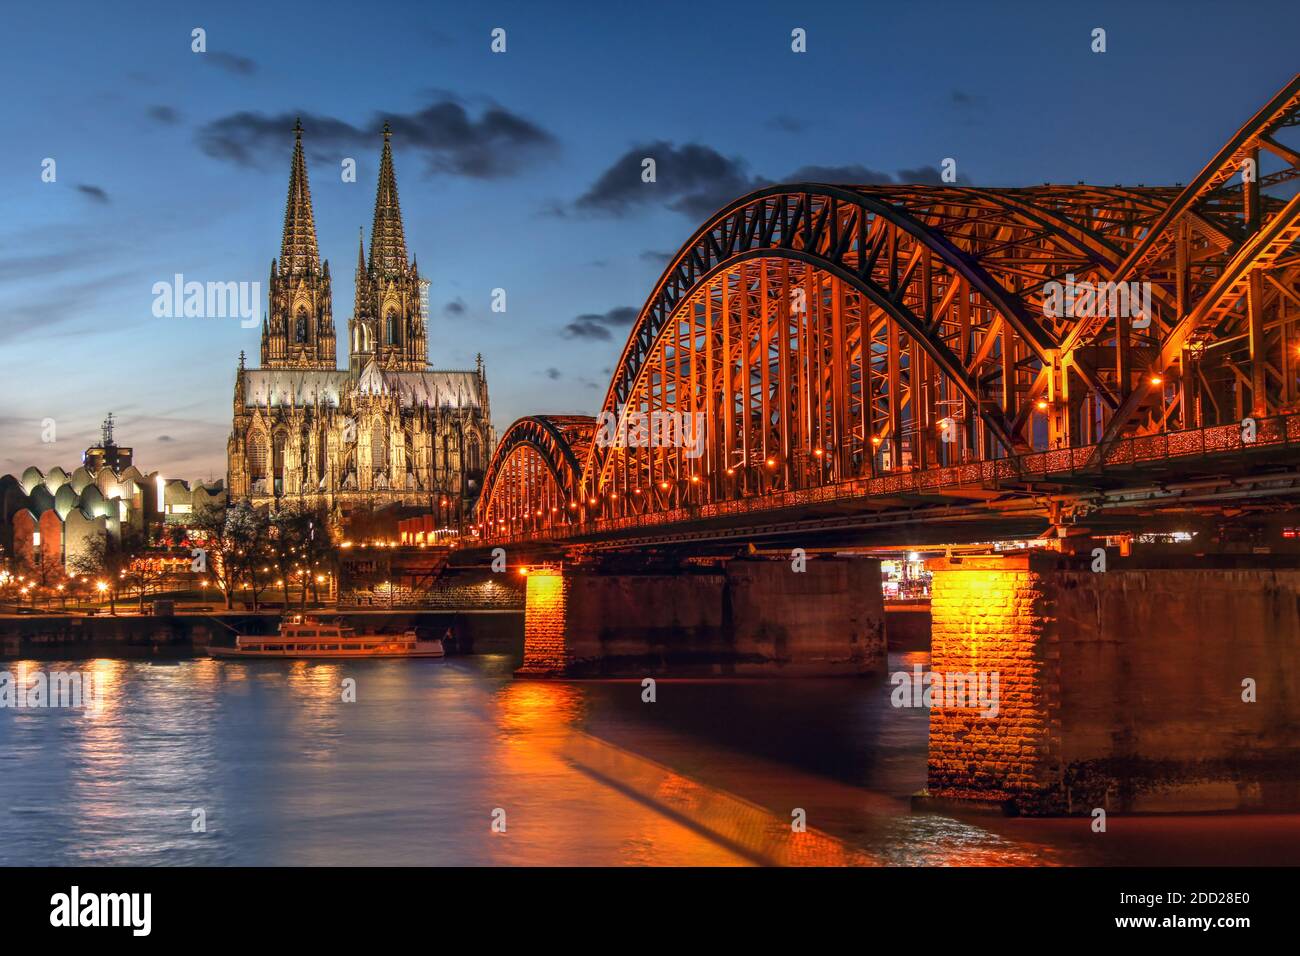 Sunset scene in Cologne (Koln) in North Rhine Westphalia region of Germany, surprising the Cologne Cathedral (Kolner Dom) and the Hohenzaller Bridge o Stock Photo